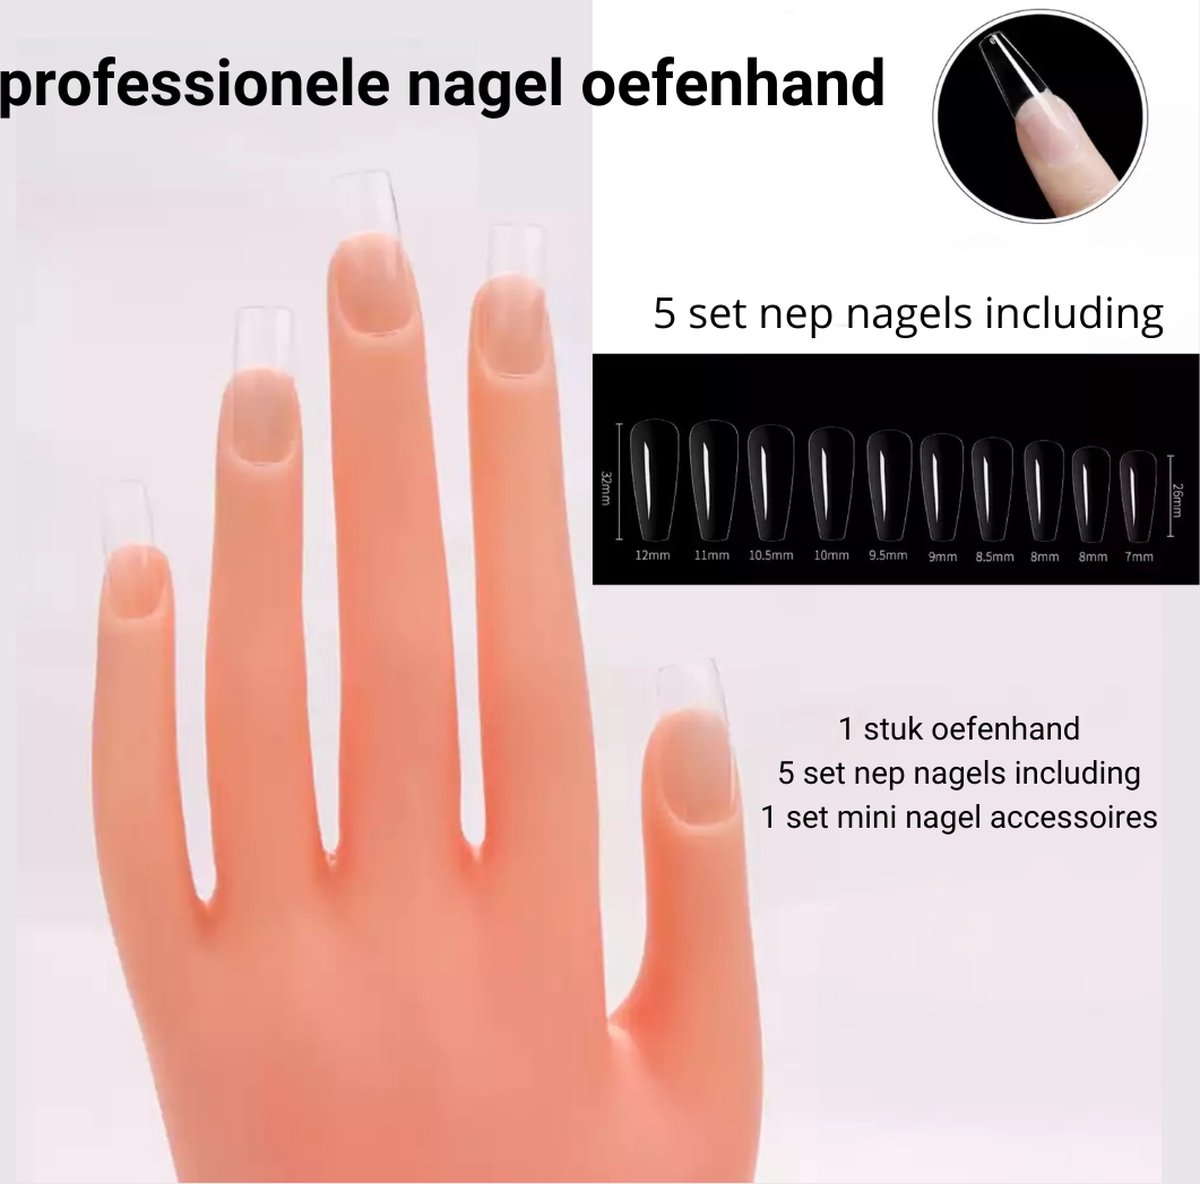 ORIANTHY Professionele nagel oefenhand - including 10 stuks nep nagels || Nail trainer - Flexible Bend Hand - Hand beweegbare- Manicure Nail Hand Training